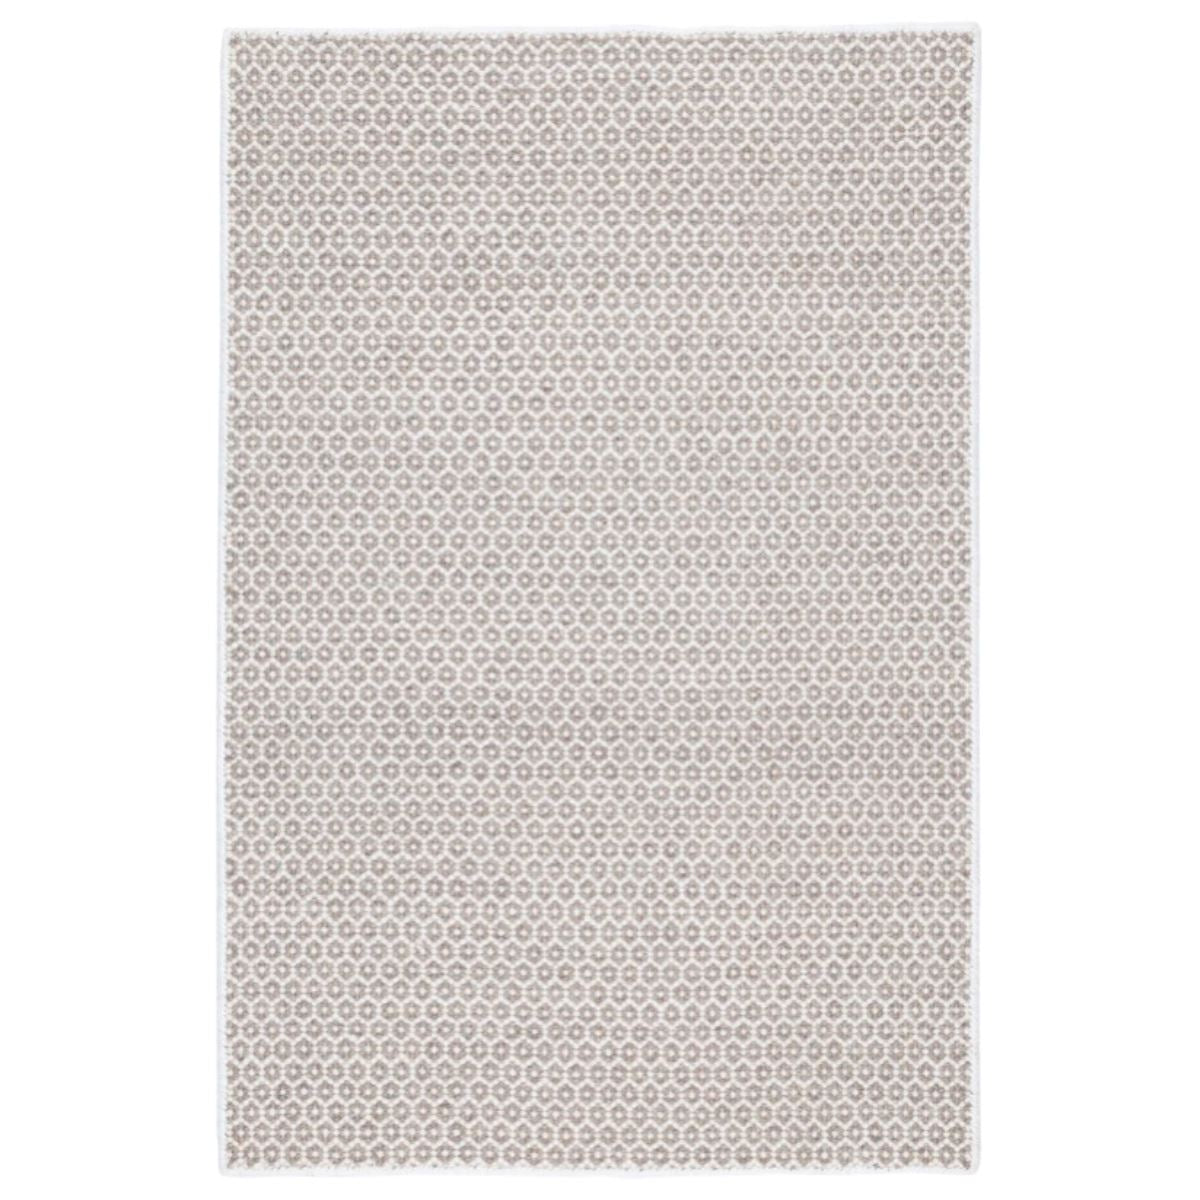 Honeycomb Ivory/Grey Woven Wool Rug. Top view. 